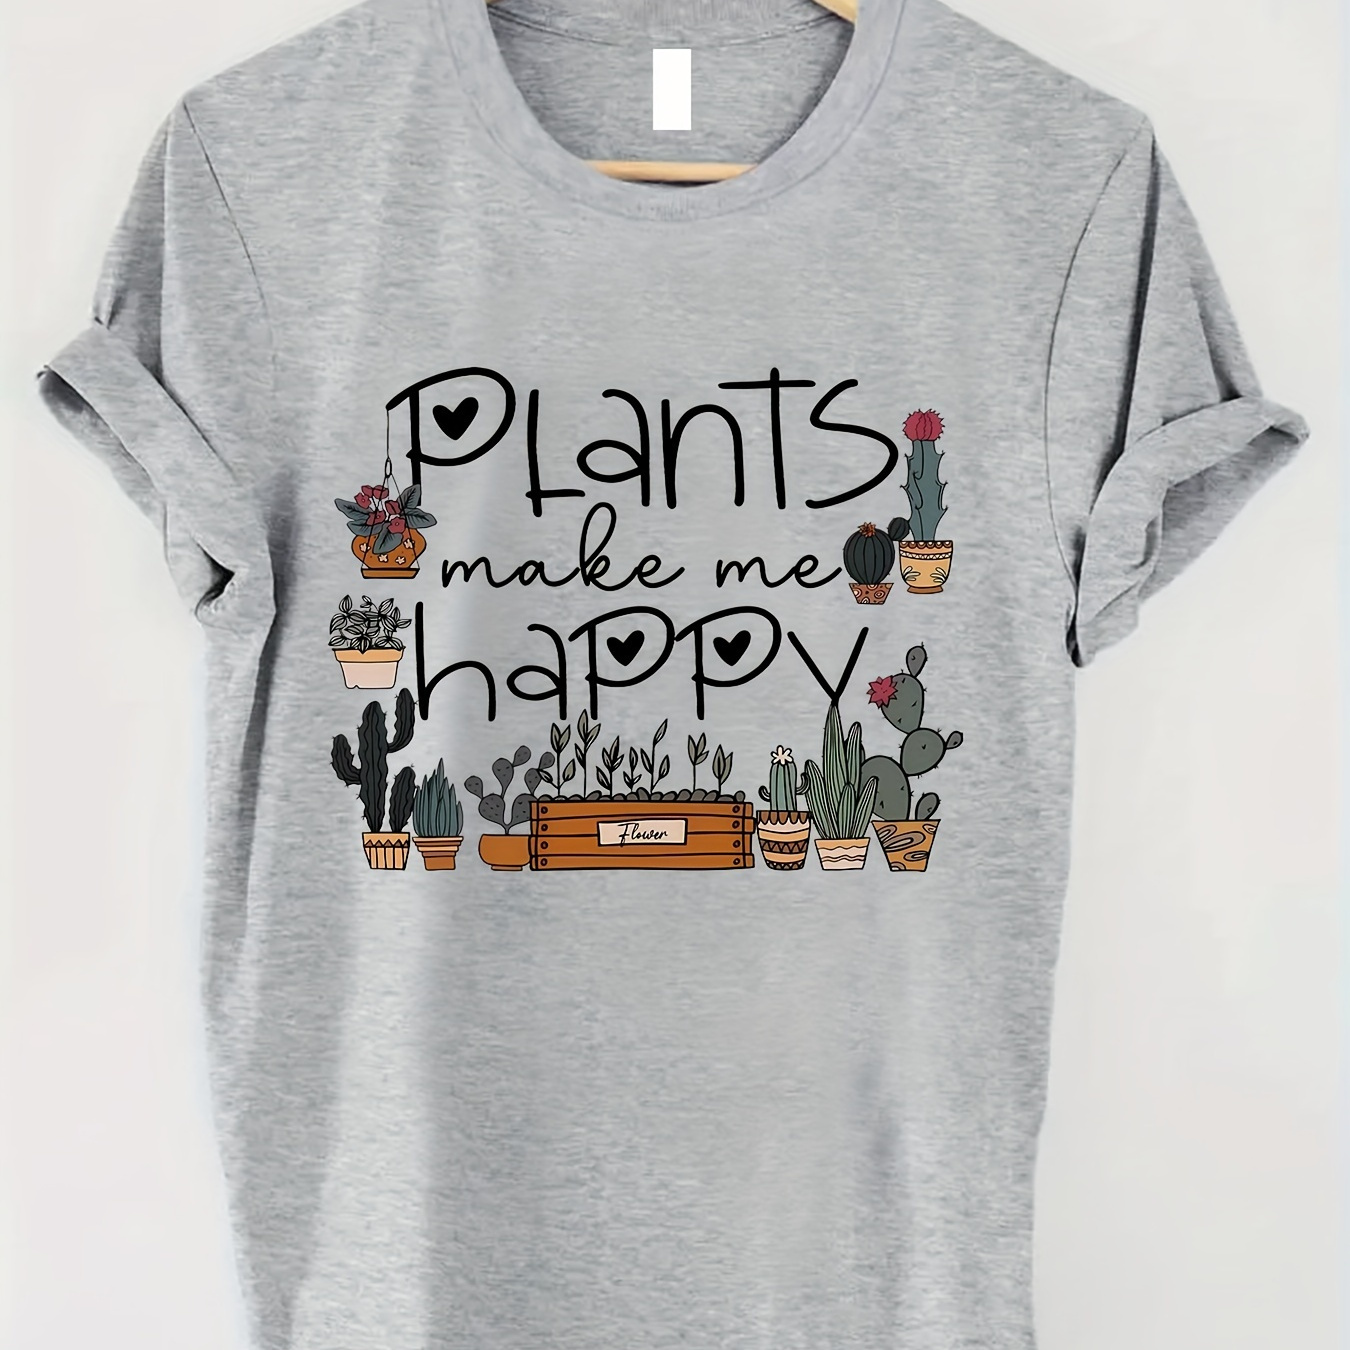 

Plants Print T-shirt, Short Sleeve Crew Neck Casual Top For Summer & Spring, Women's Clothing